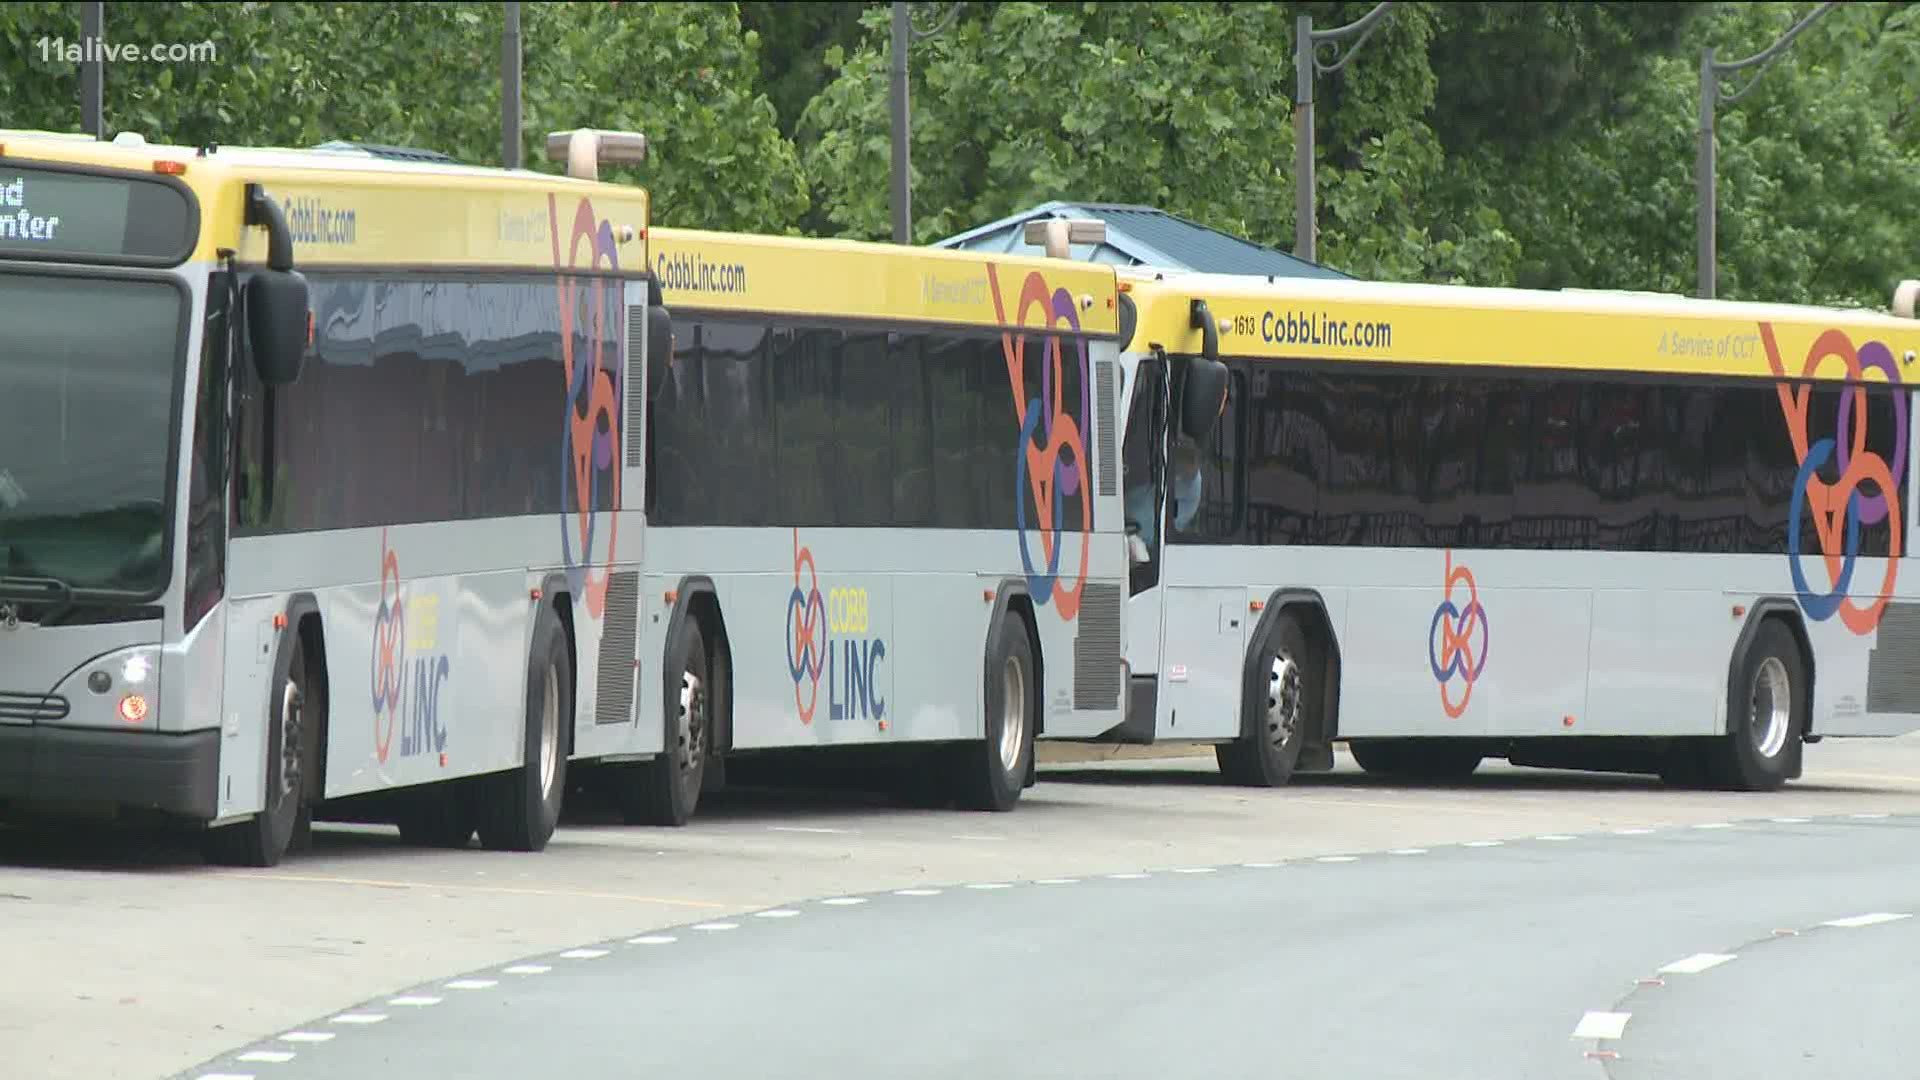 Gwinnett County's transit system is taking steps to make buses safer, but issues remain at transit systems around metro Atlanta.